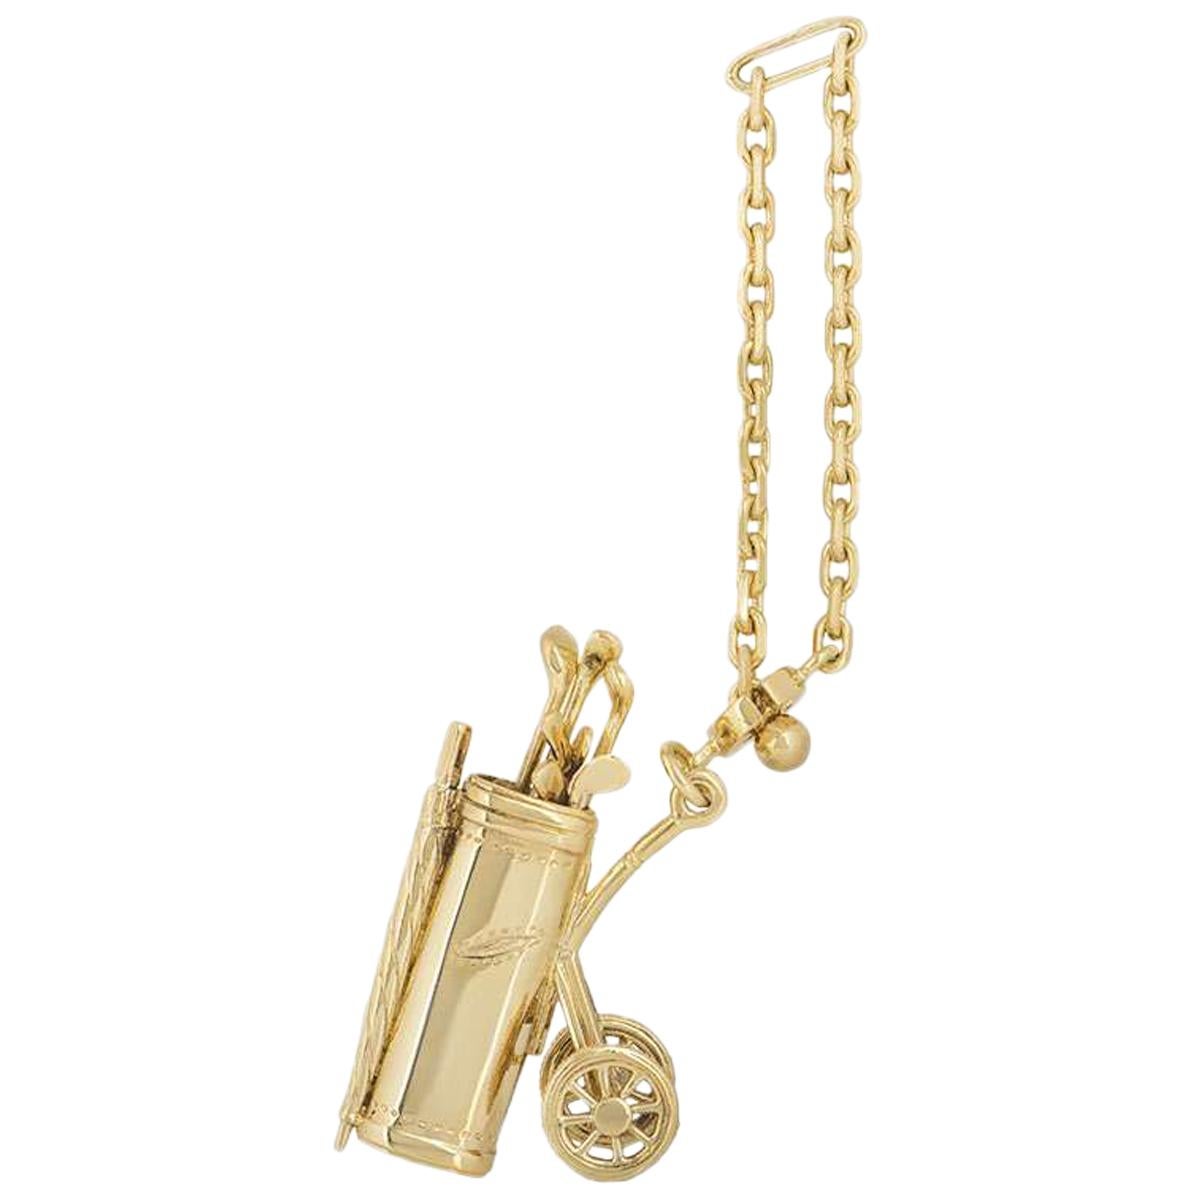 A yellow gold golf trolly key chain by Dunhill. The golf trolly is complete with 7 golf clubs, spinning wheels and a hanging chain. The key chain has a high polished finish and measures 4cm in height, with a gross weight of 19.5 grams.

The key